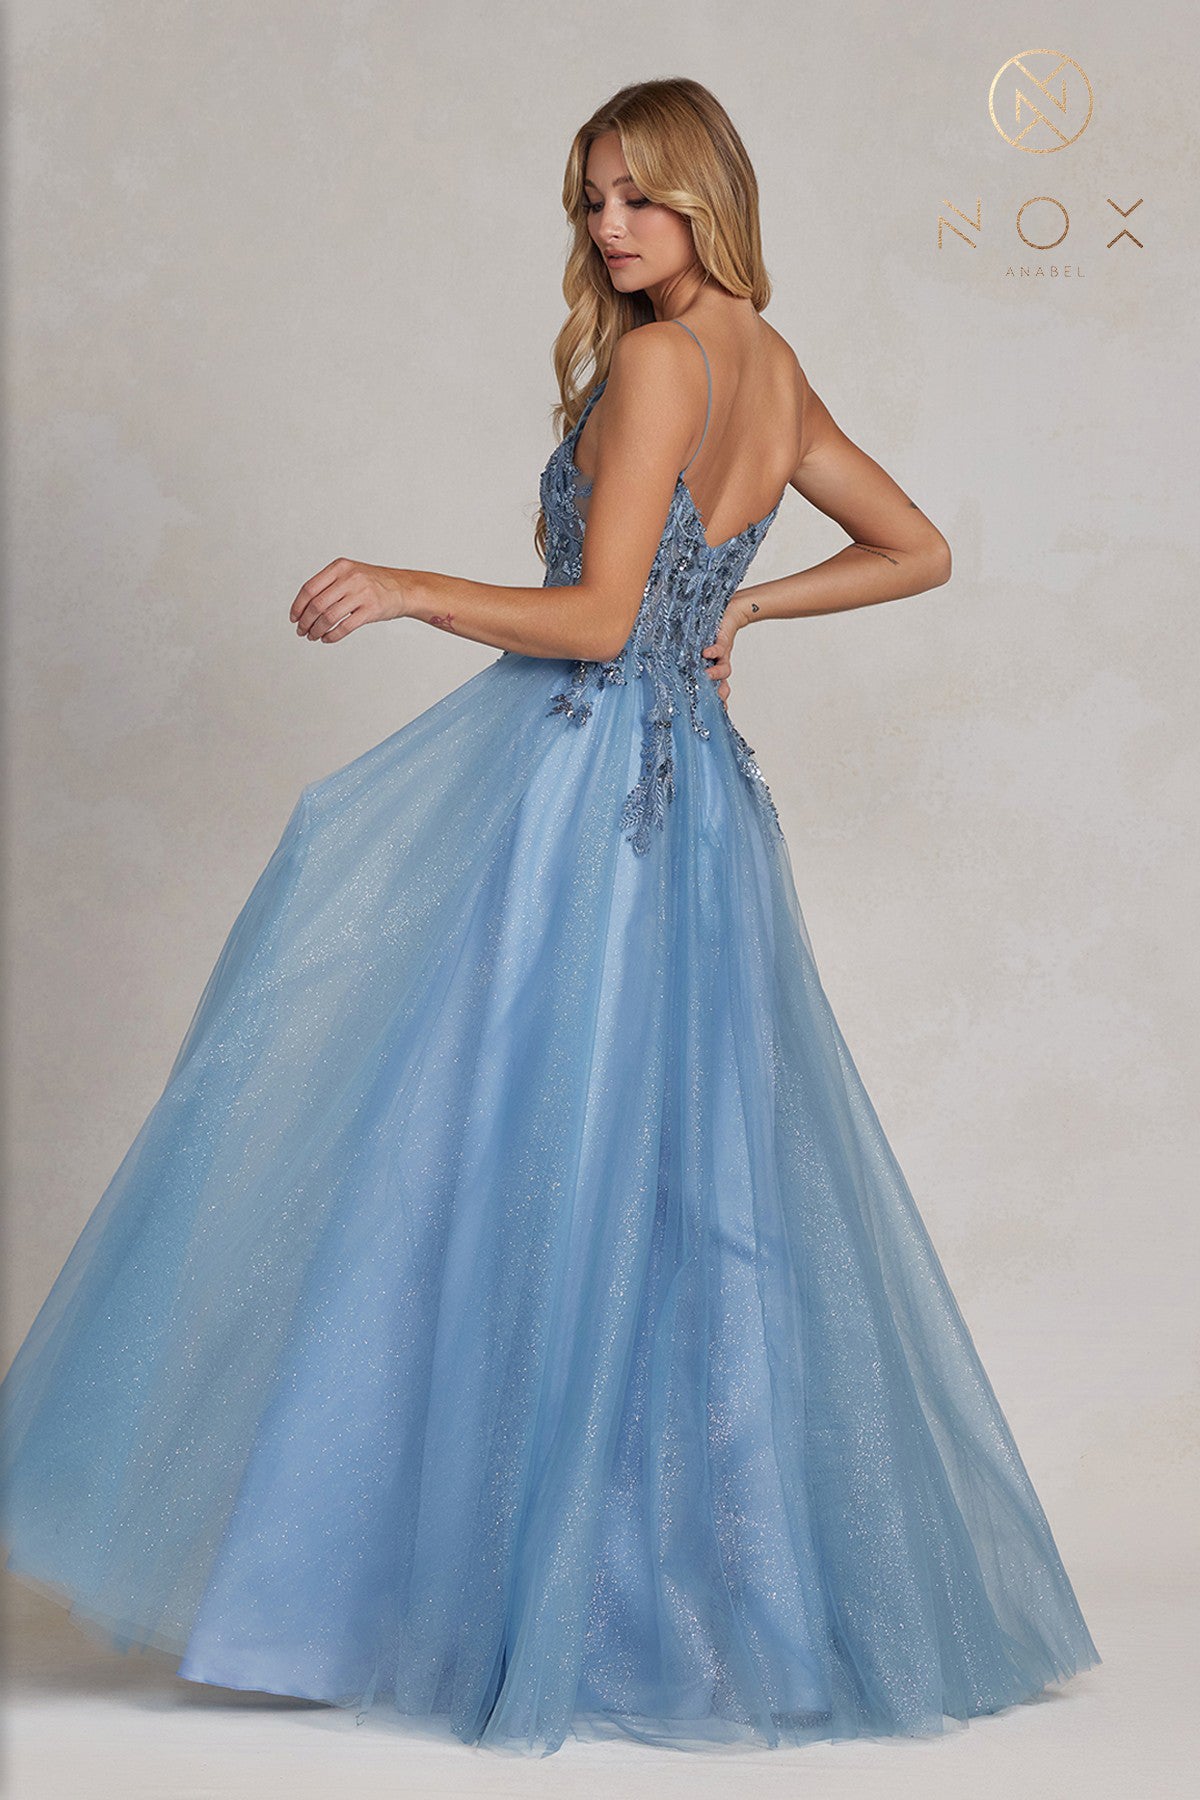 Glittered Tulle Prom Dress By Nox Anabel -E1125